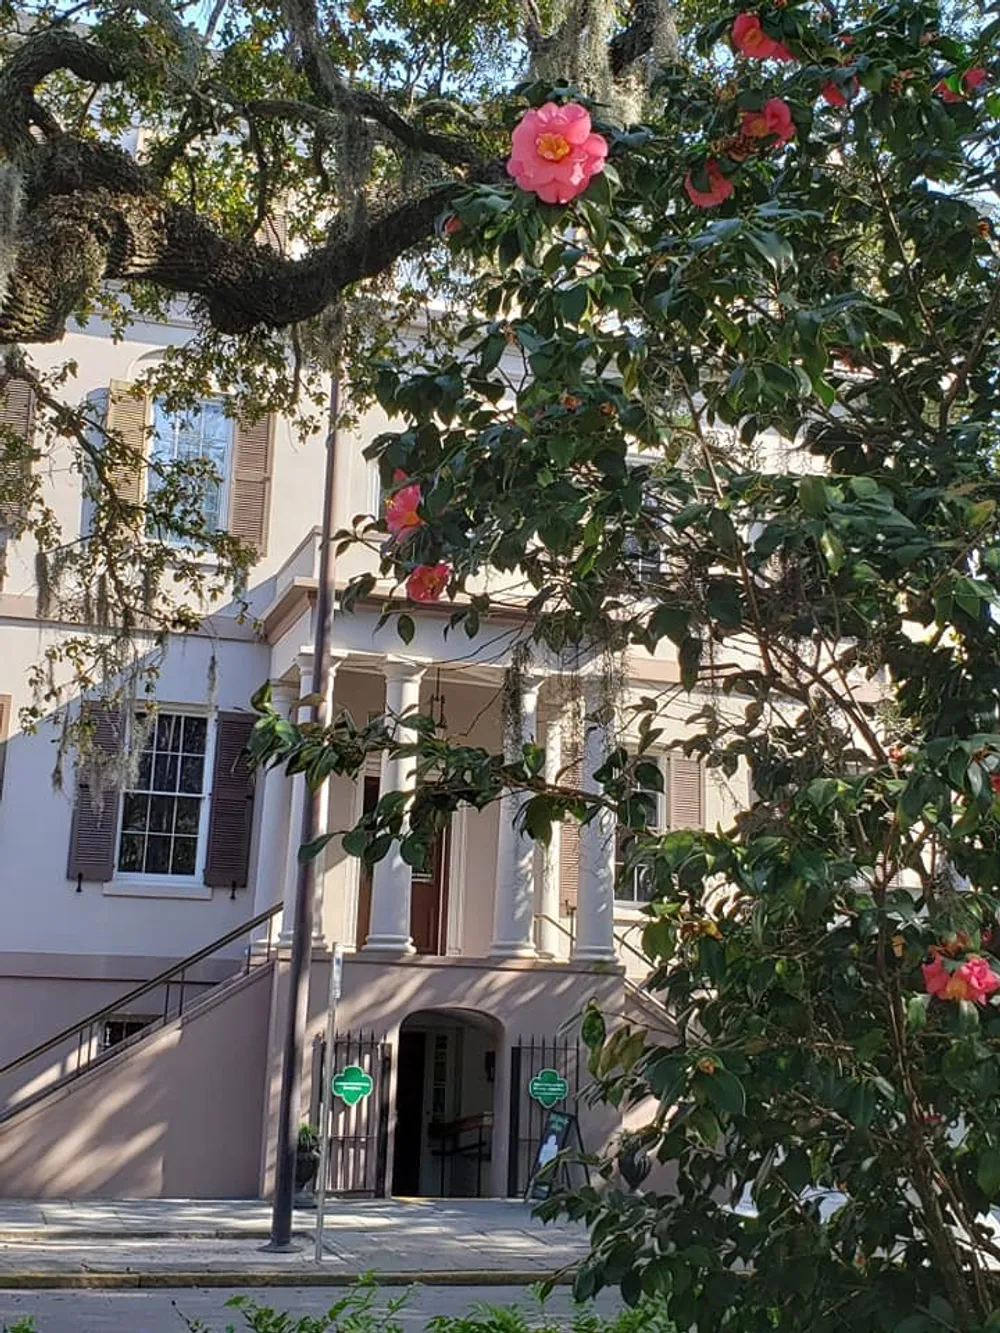 Blooming pink camellias adorn the view of a stately building with a classical faade and Spanish moss-draped trees evoking a tranquil southern charm